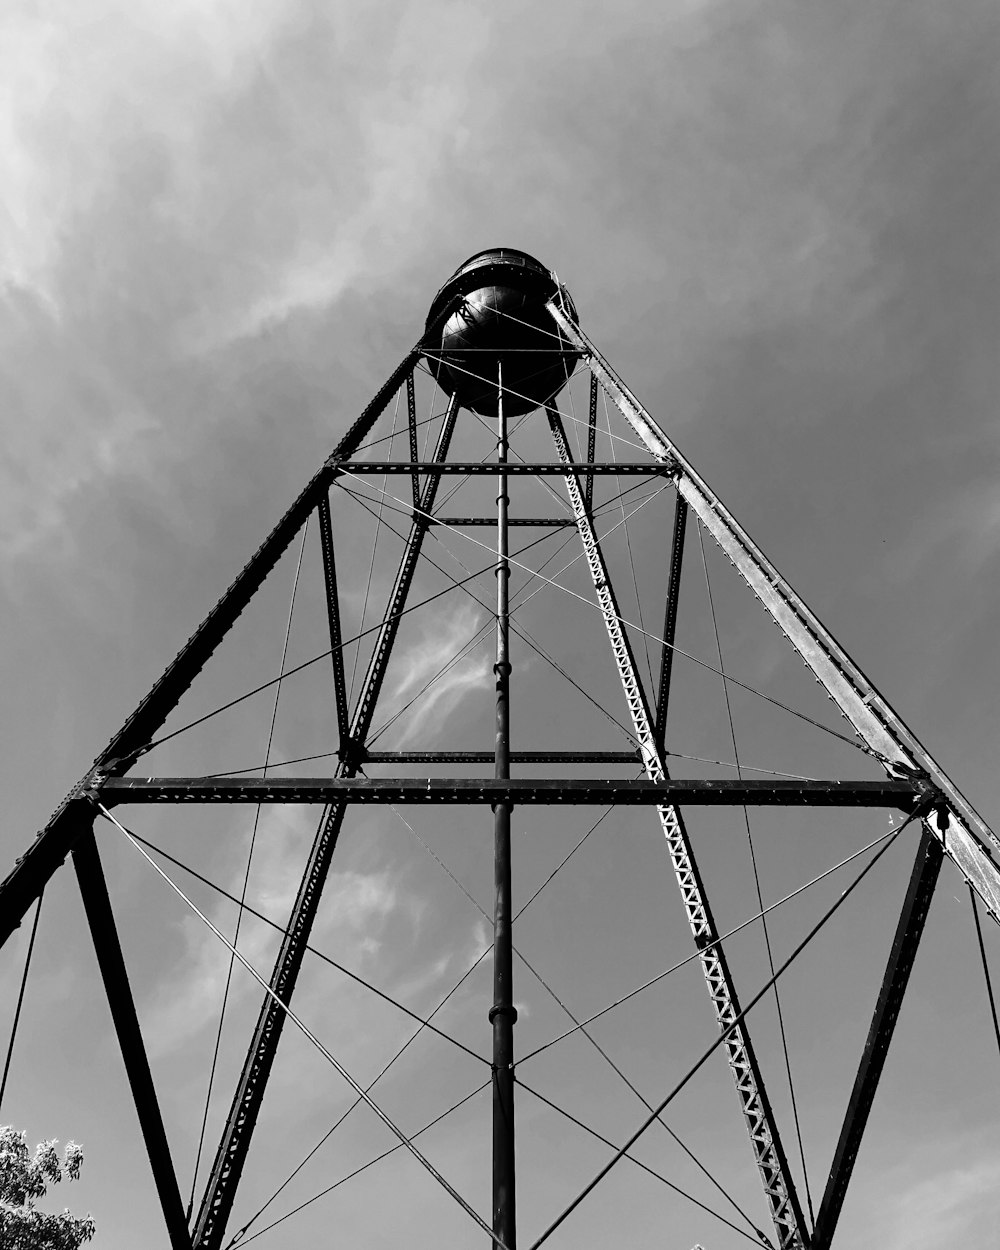 grayscale photo of metal tower